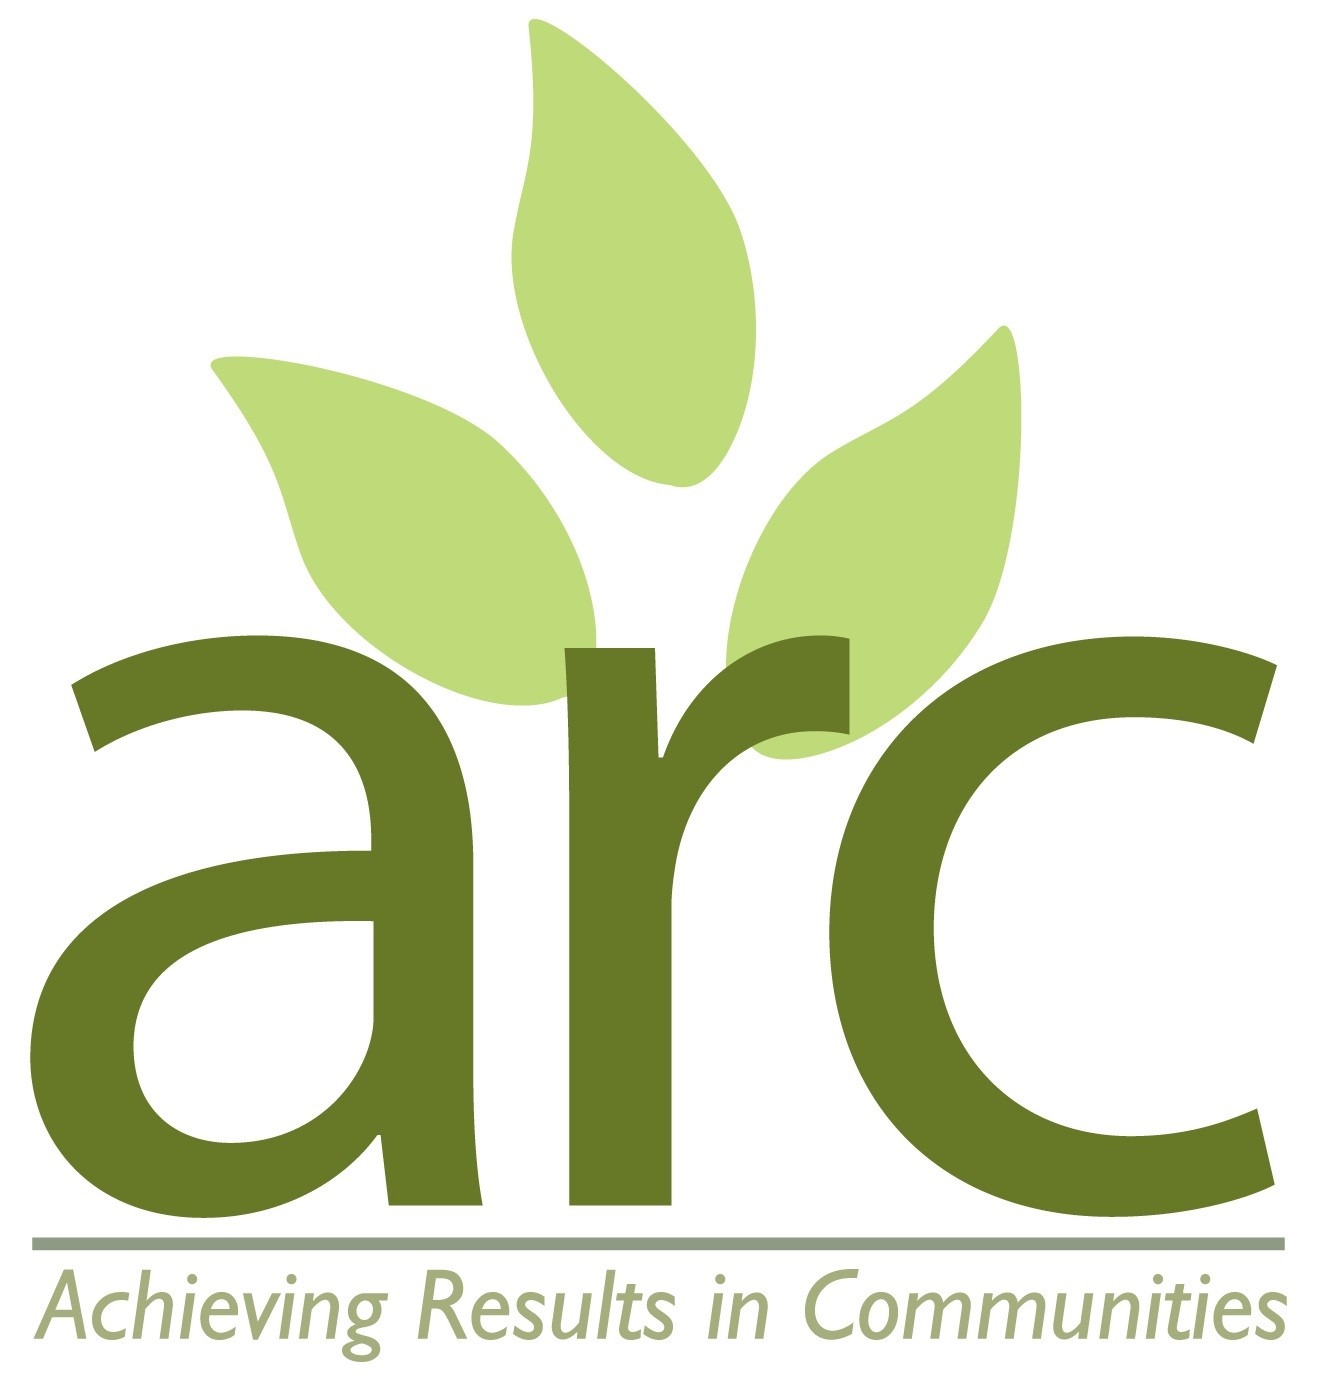 Achieving results in Communities